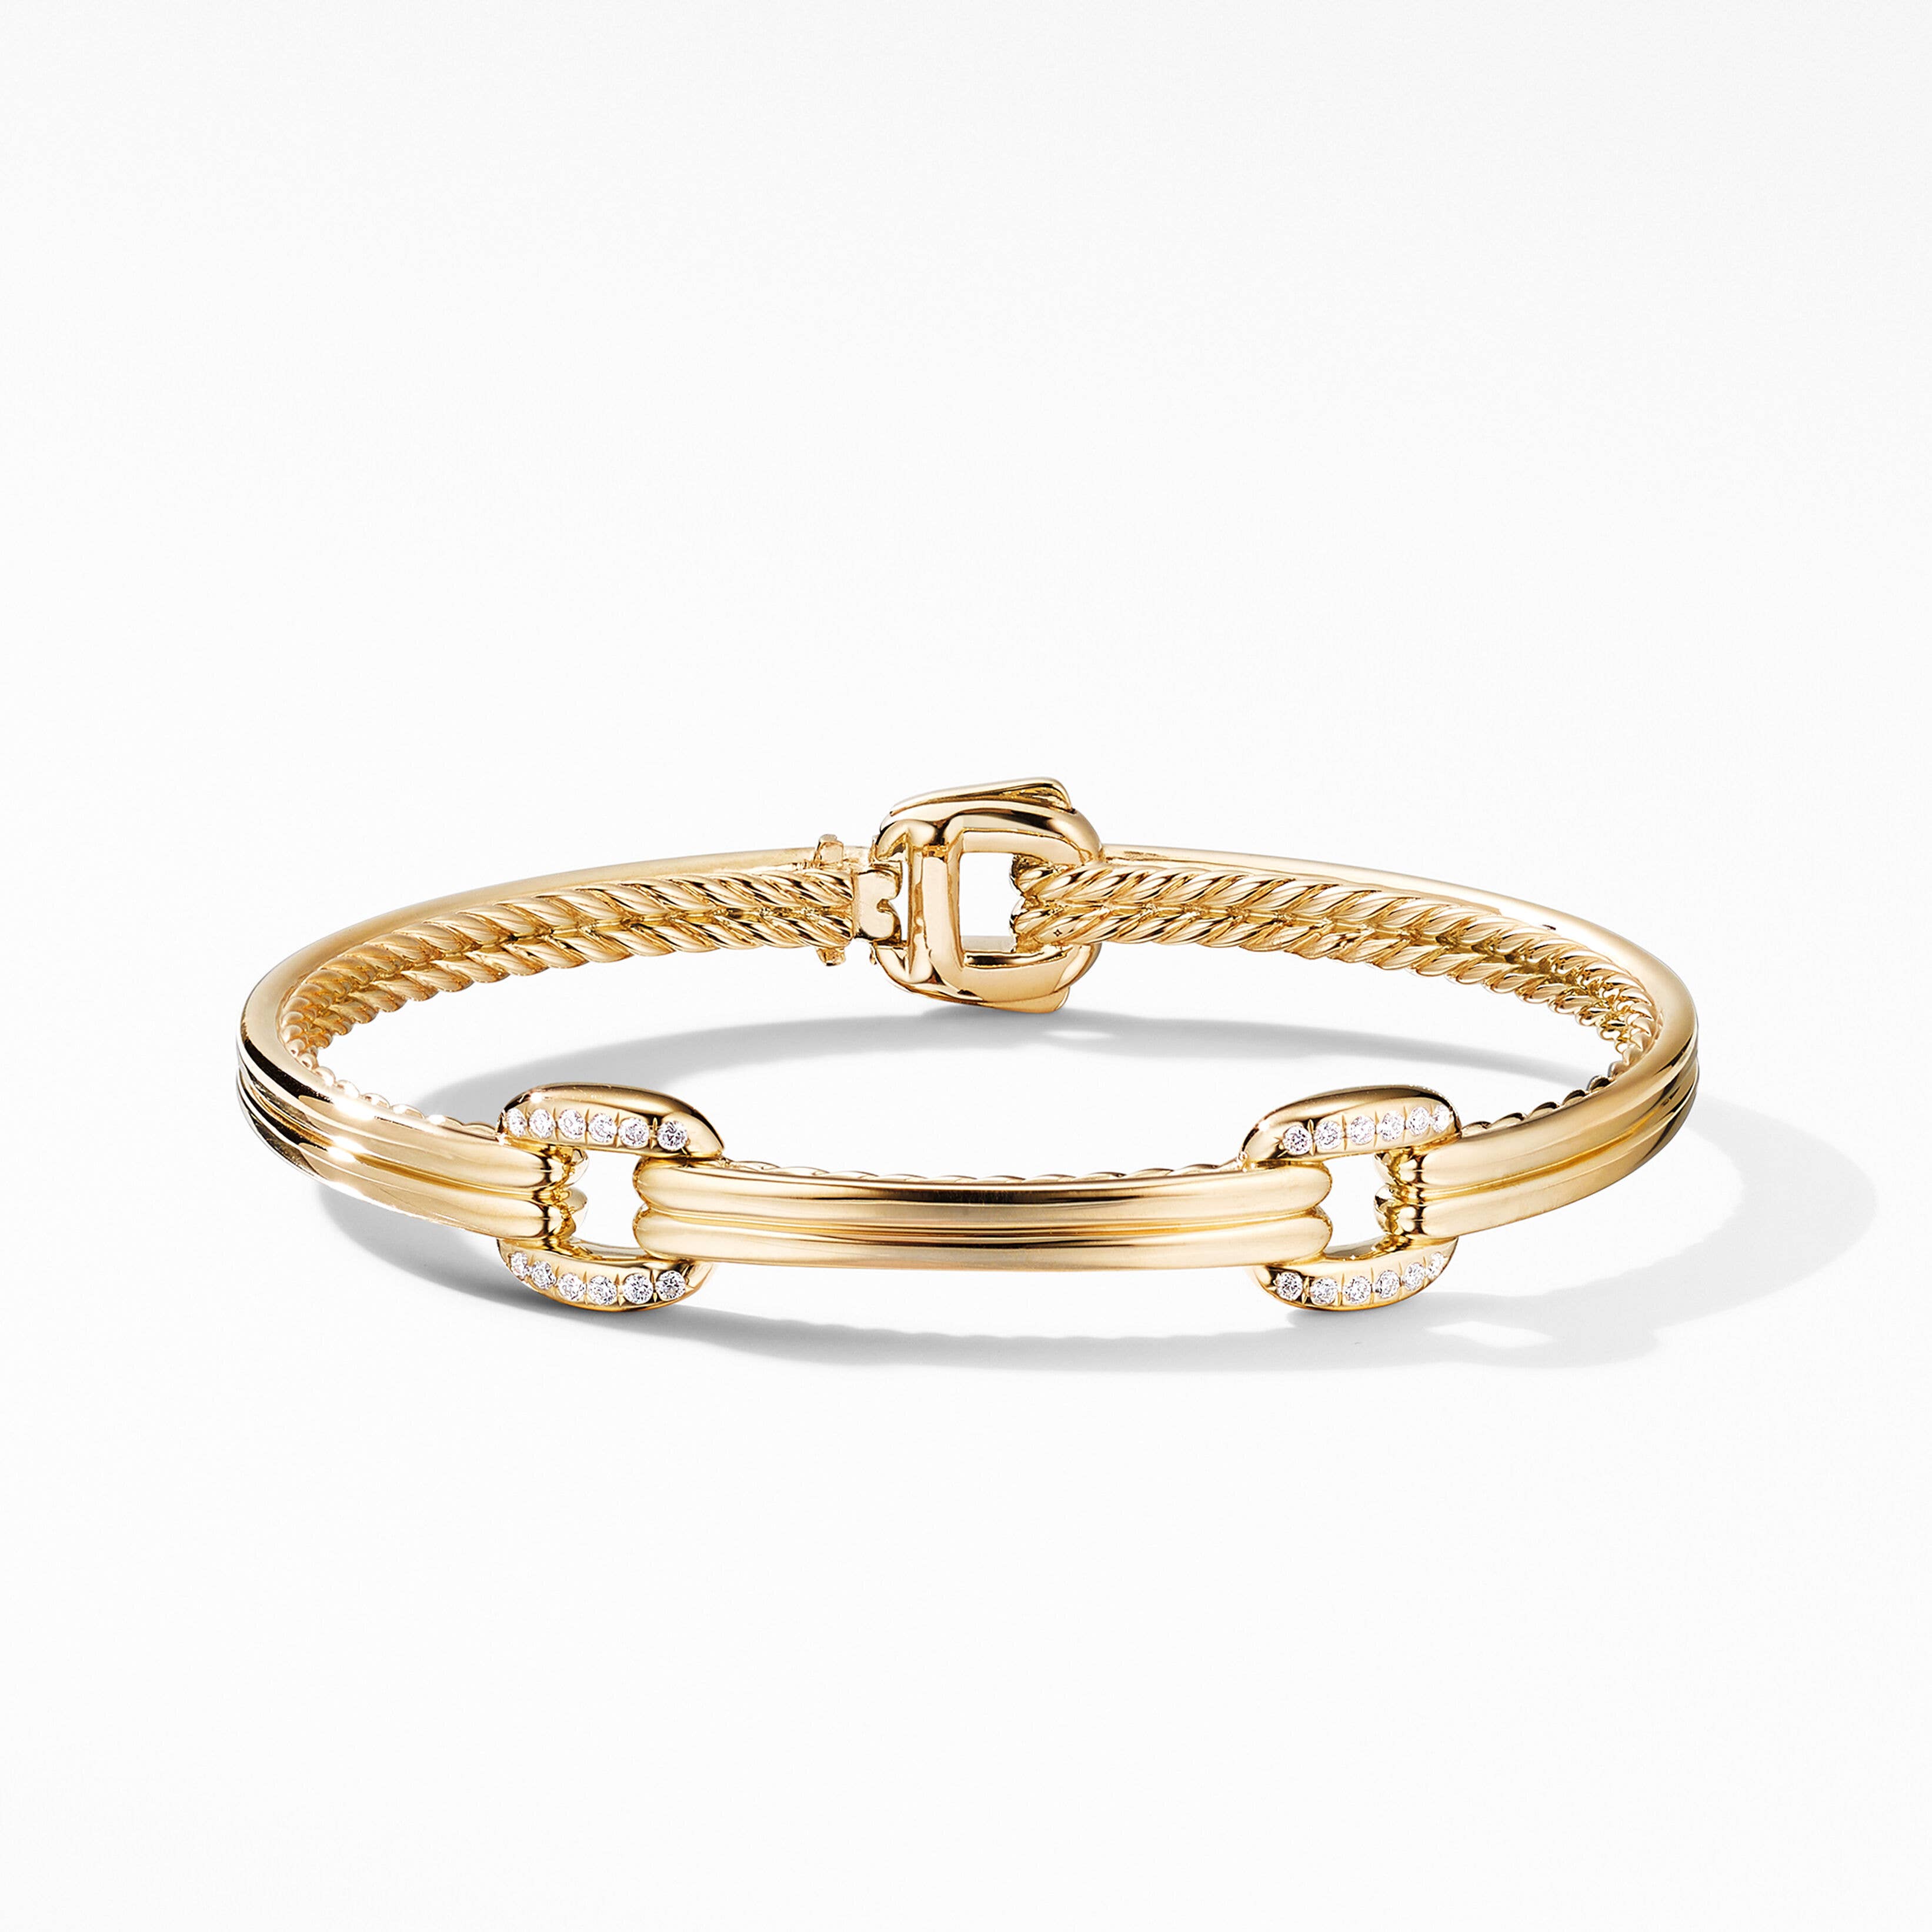 Thoroughbred Double Link Bracelet in 18K Yellow Gold with Pavé Diamonds